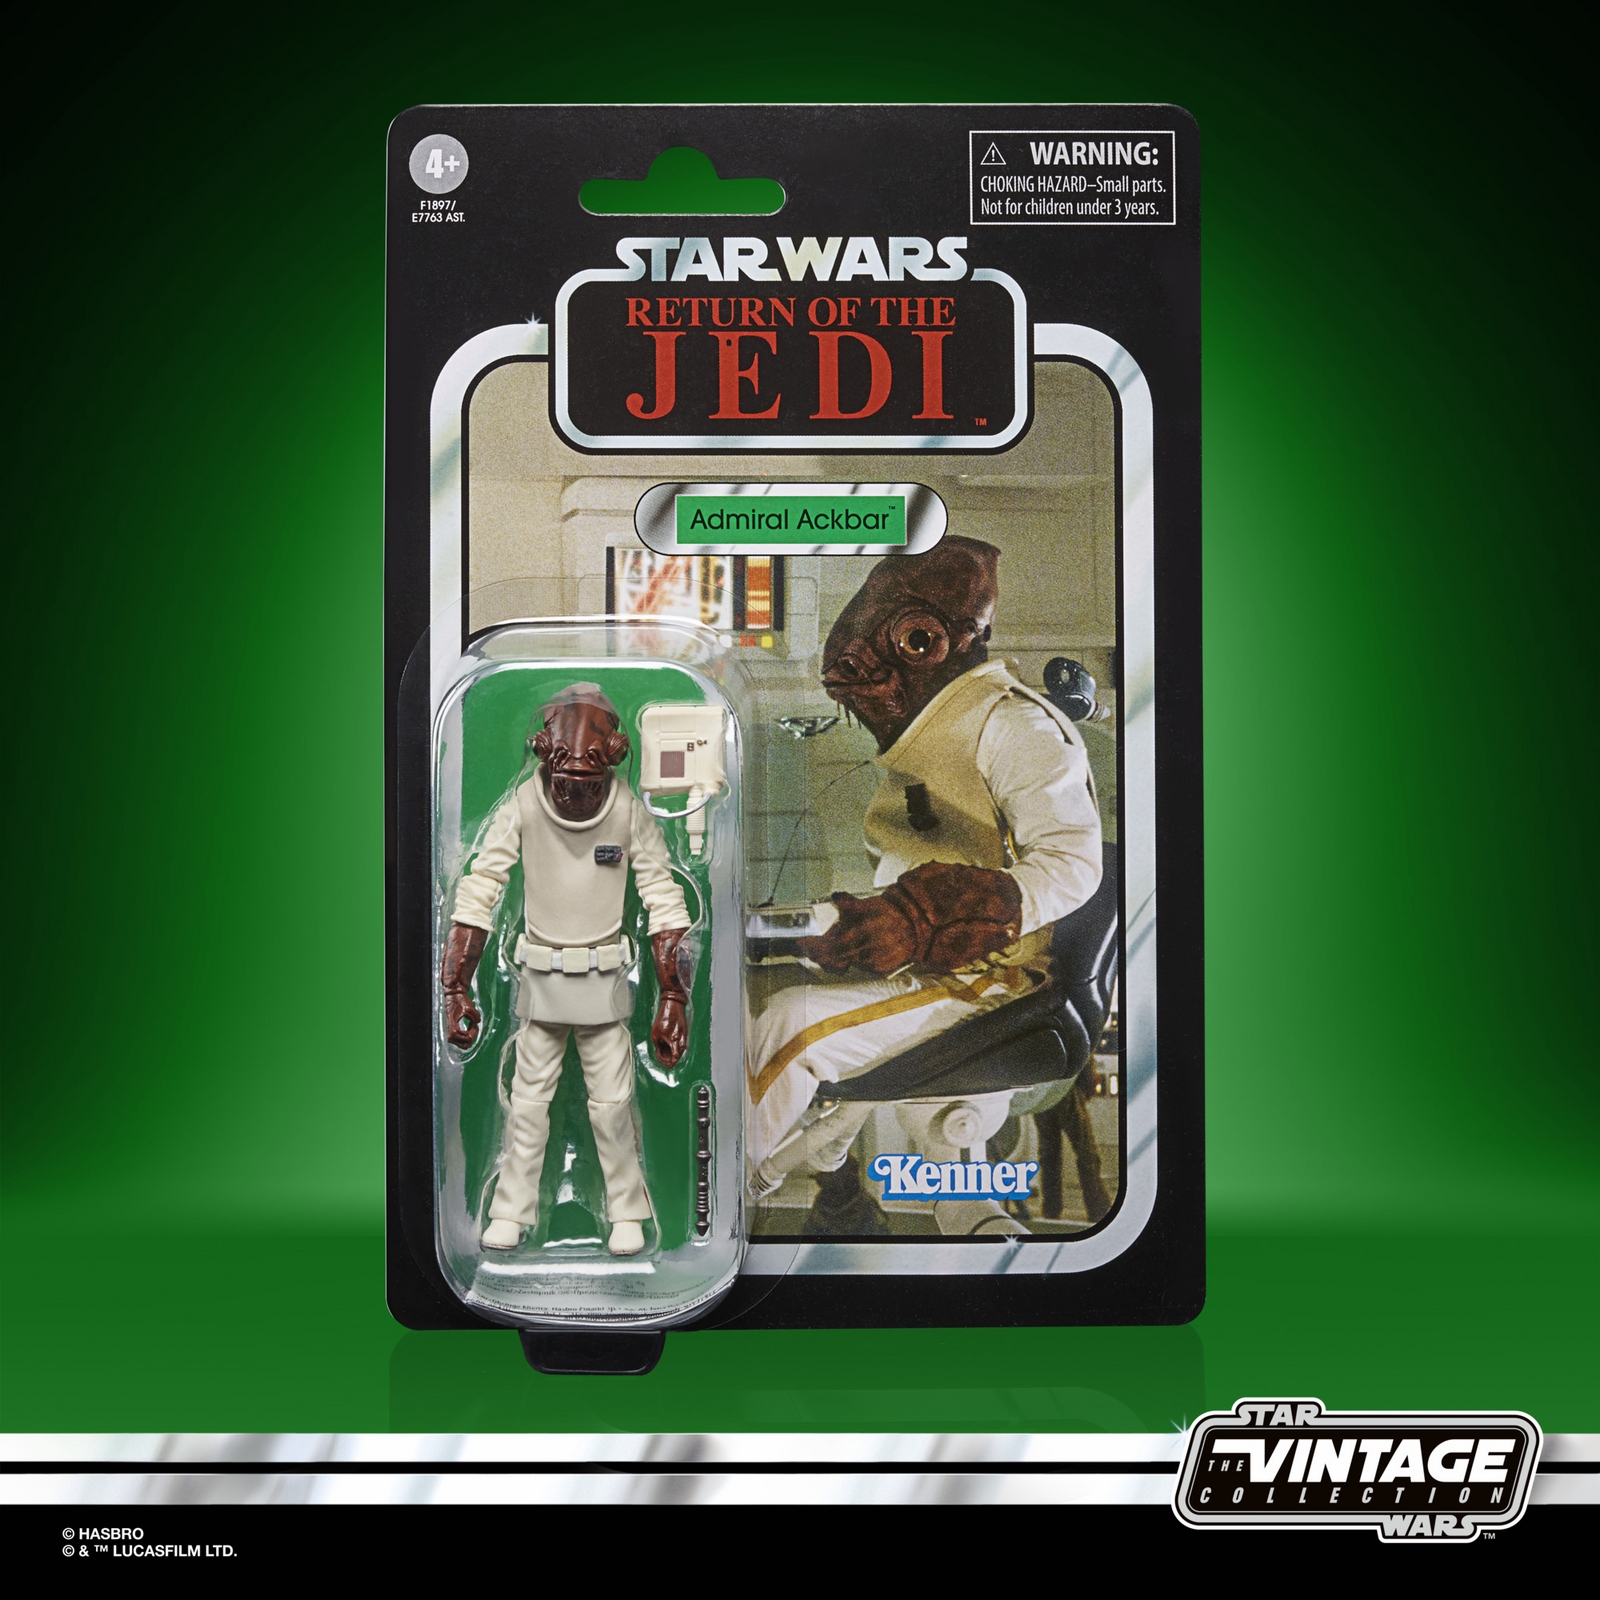 STAR WARS THE VINTAGE COLLECTION 3.75-INCH ADMIRAL ACKBAR Figure - in pck (1).jpg